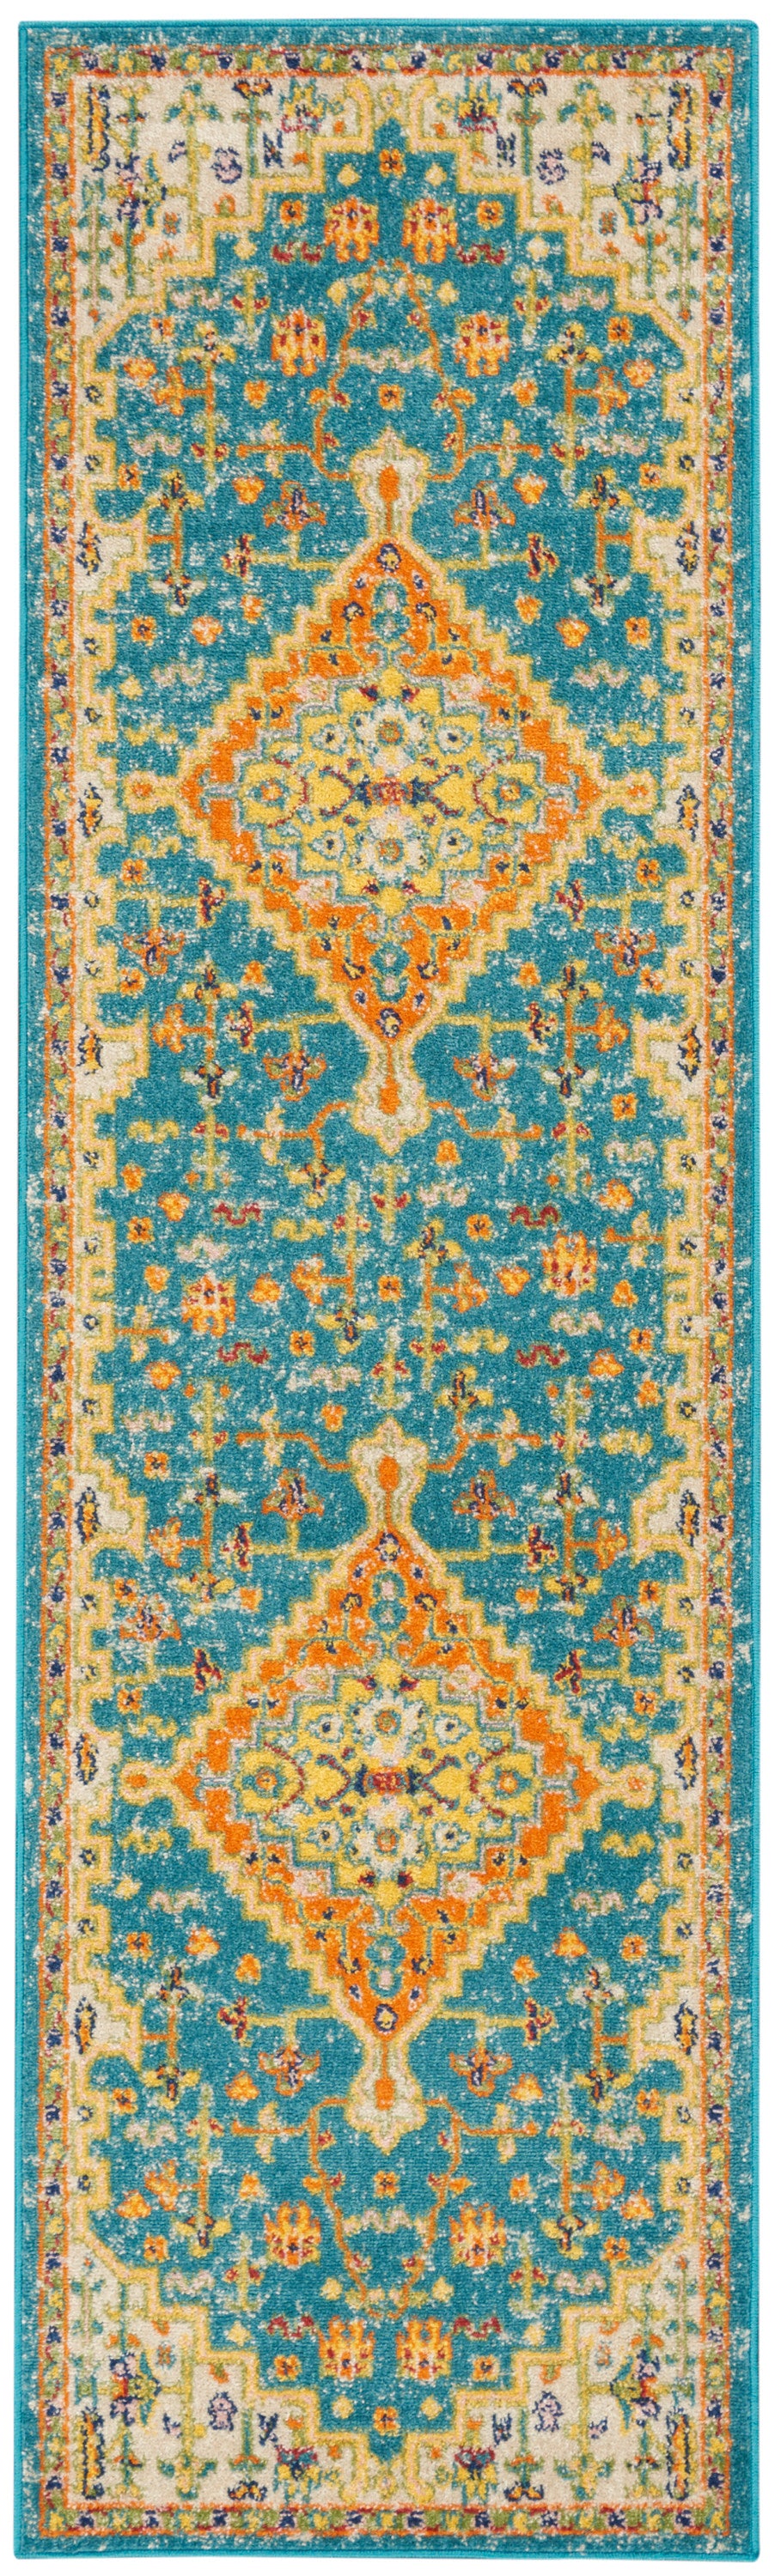 Nourison Allur 8' Runner Turquoise Ivory Area Rug ALR01 Turquoise Ivory